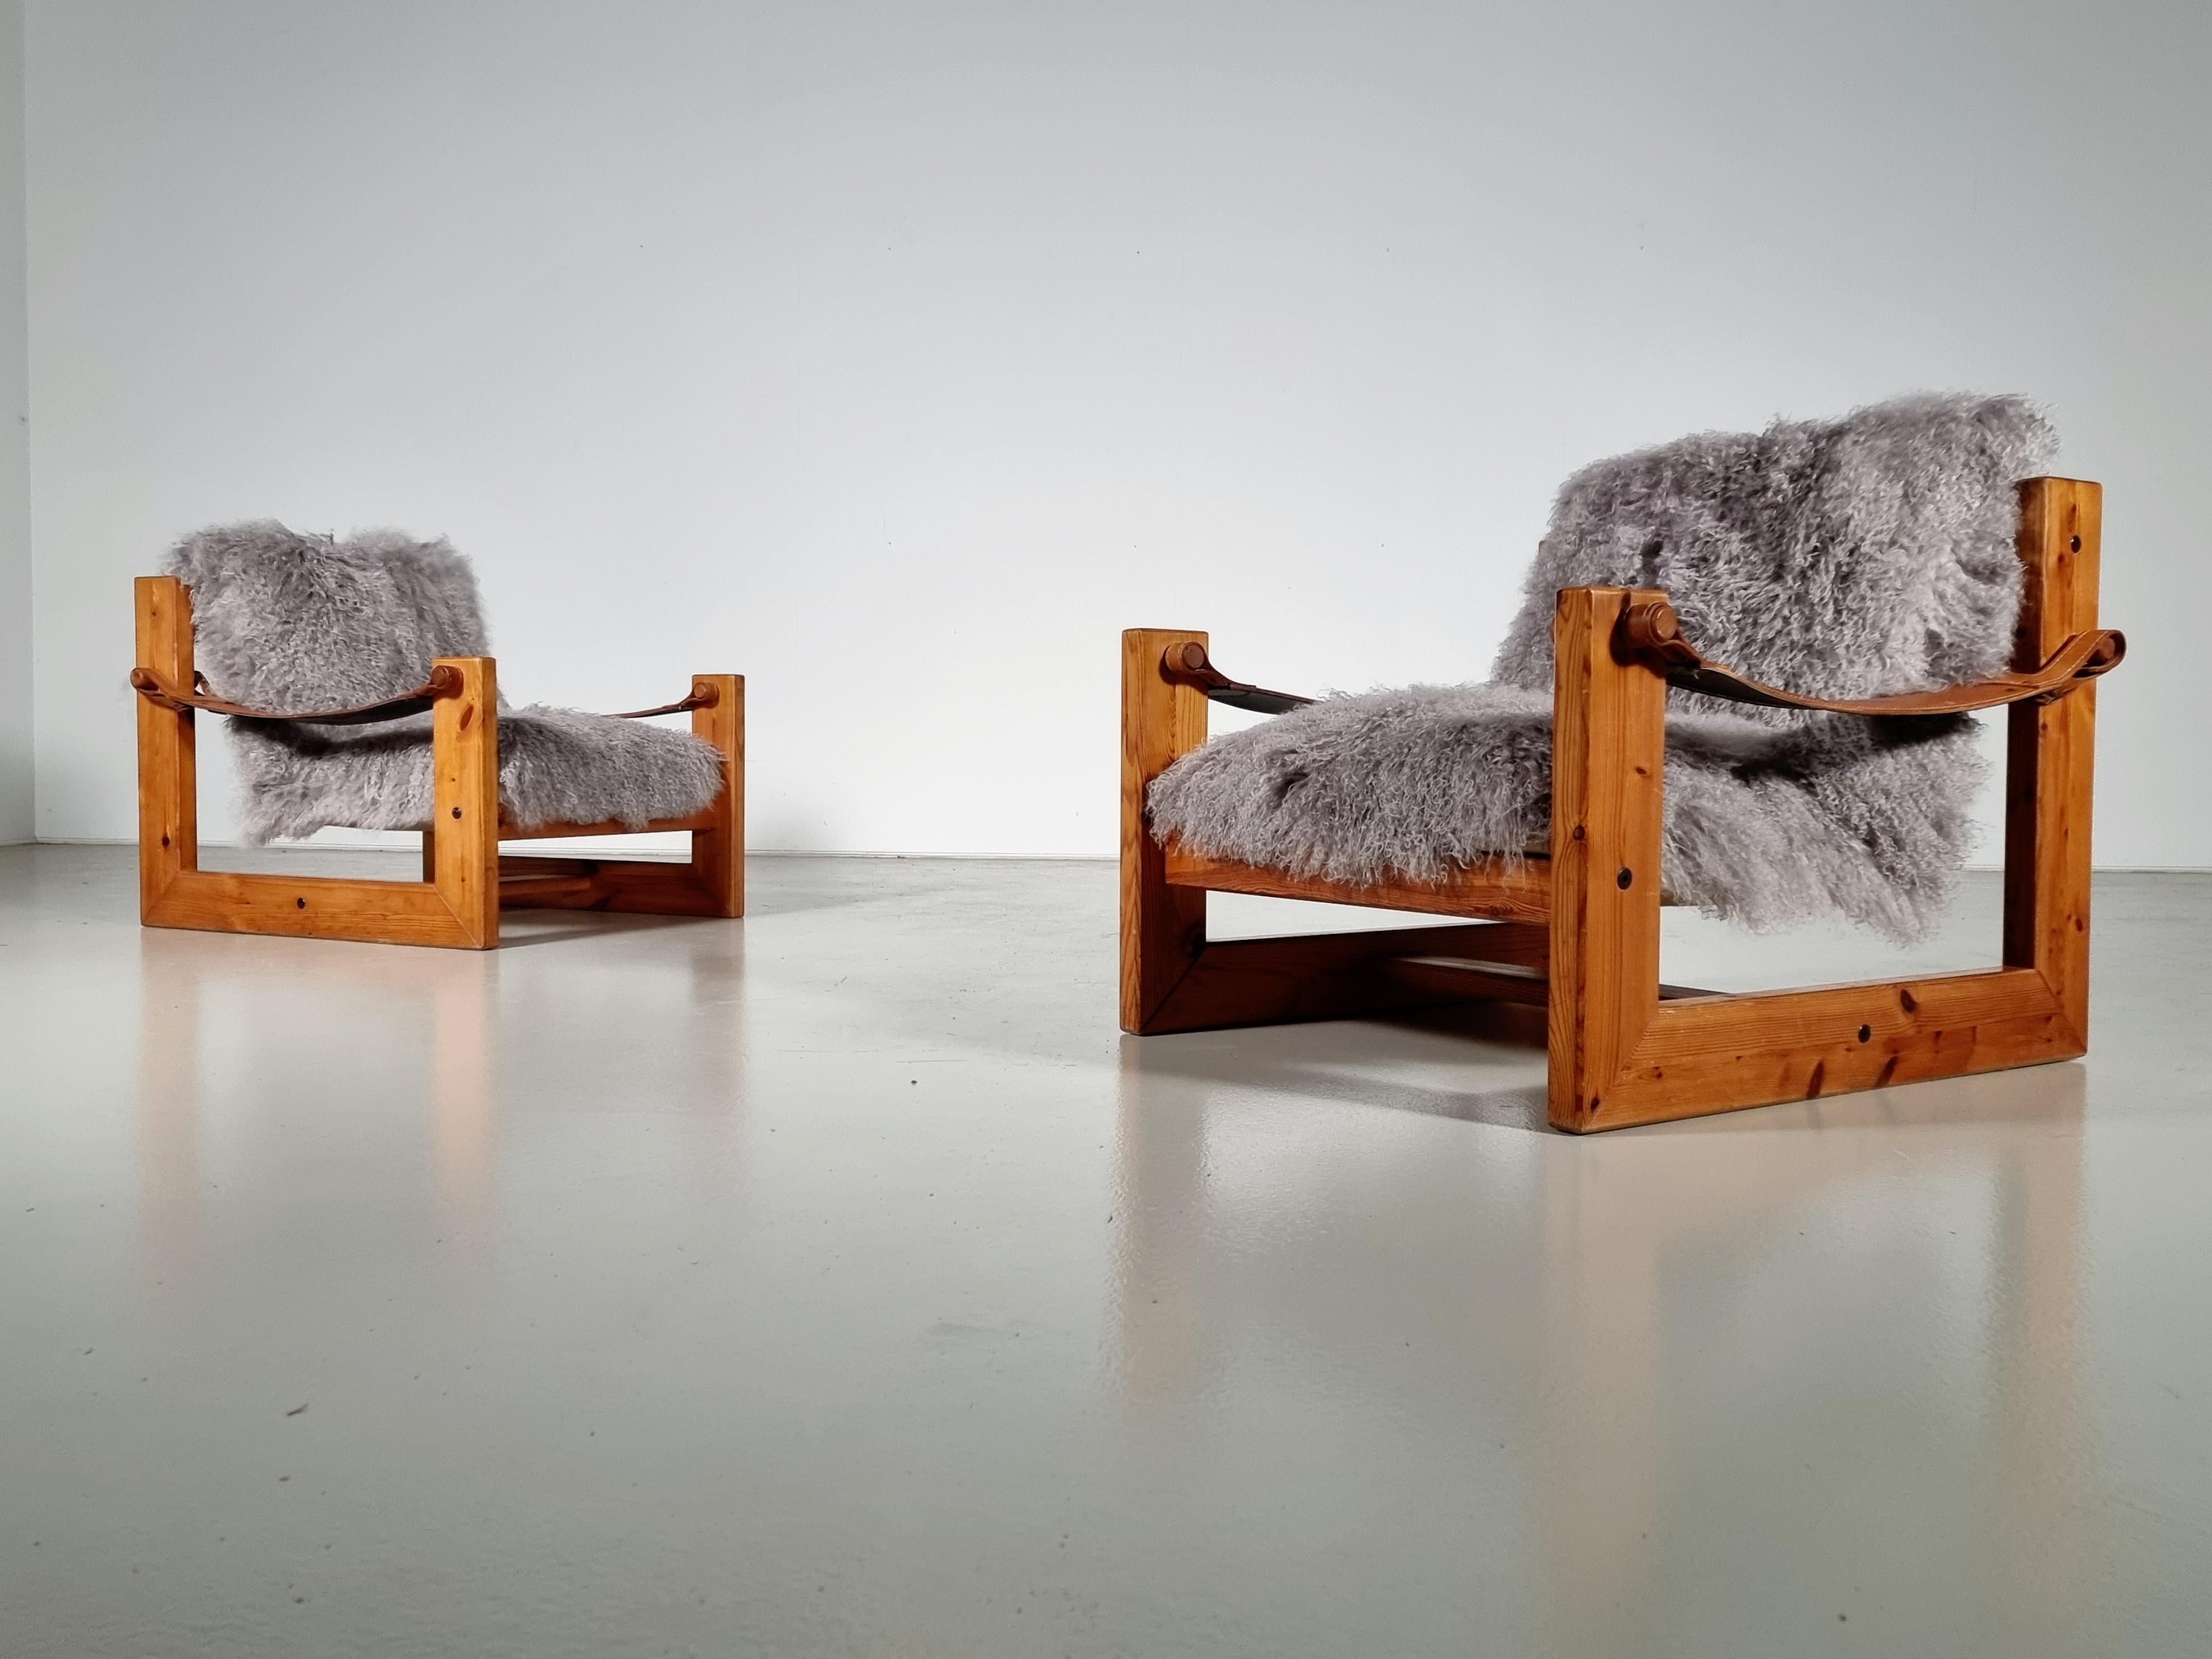 Set of 2 large lounge sling chairs made of solid pine, The Netherlands, circa 1970s. 

We added new long hair Mongolian lamb shearling cushions that hide the canvas seats. The pine wood frames are in original condition. Beautifully patinated leather